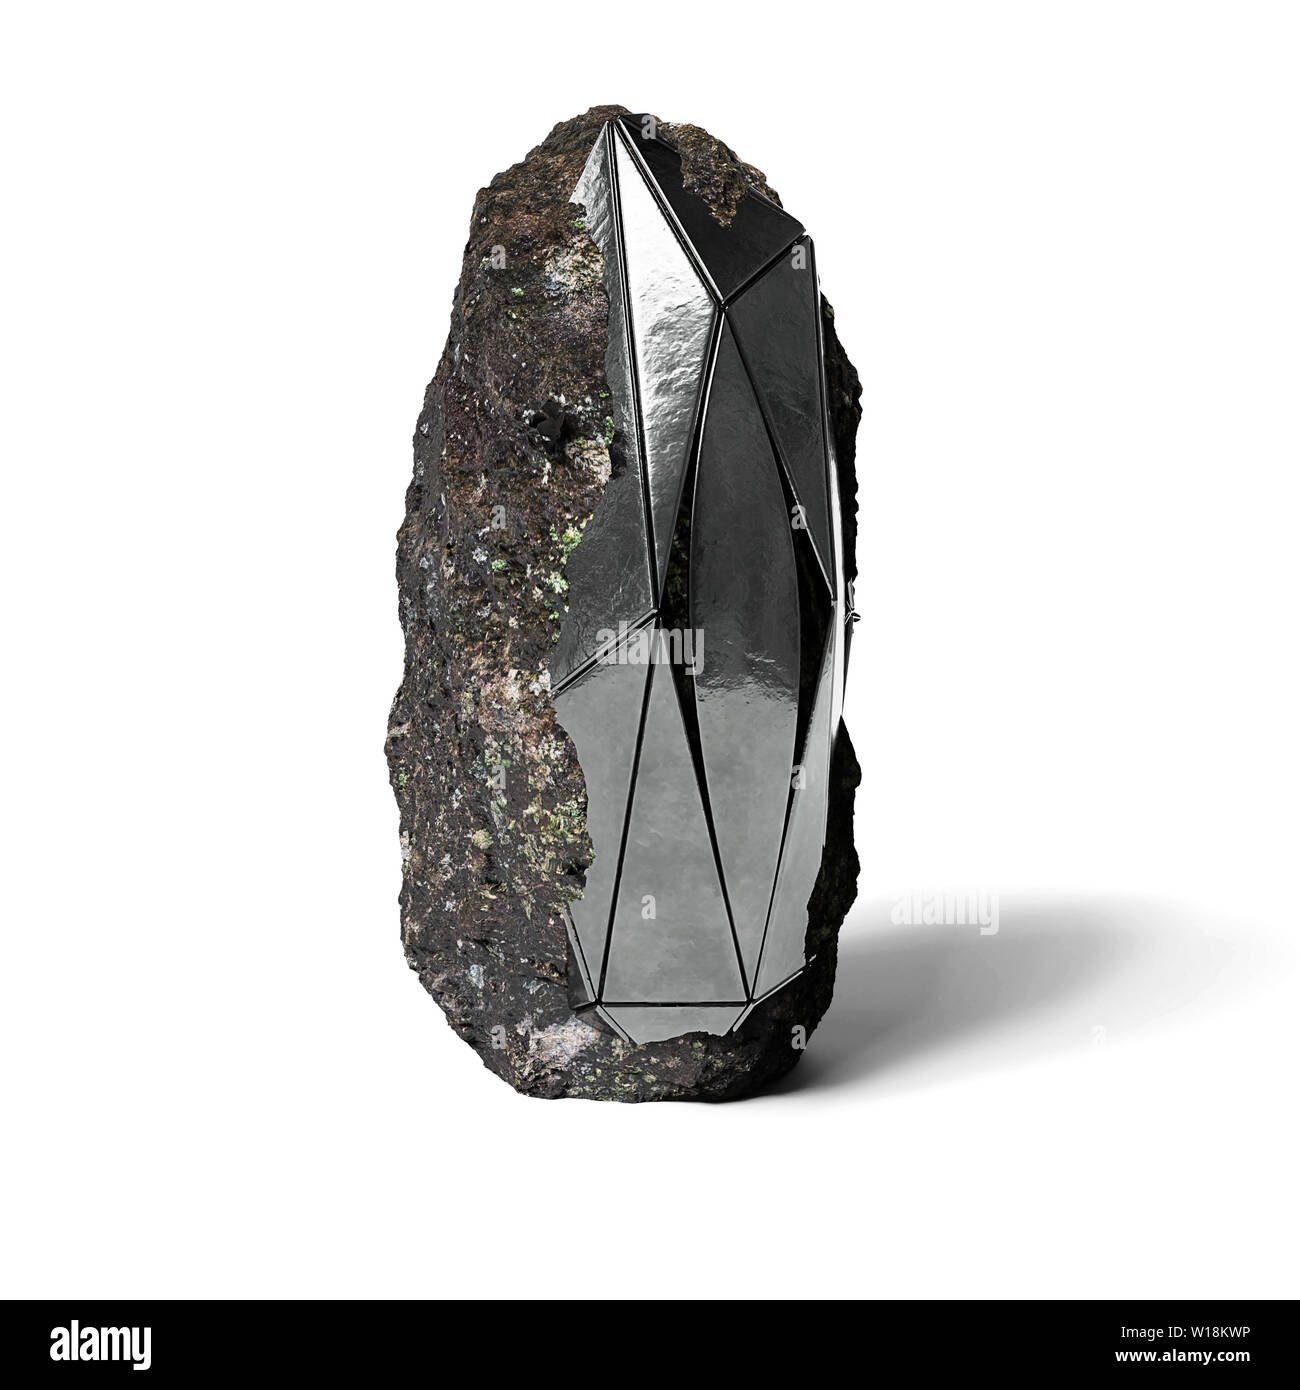 steel monolith embedded in rock, abstract shape, sci-fi object isolated on white ground Stock Photo